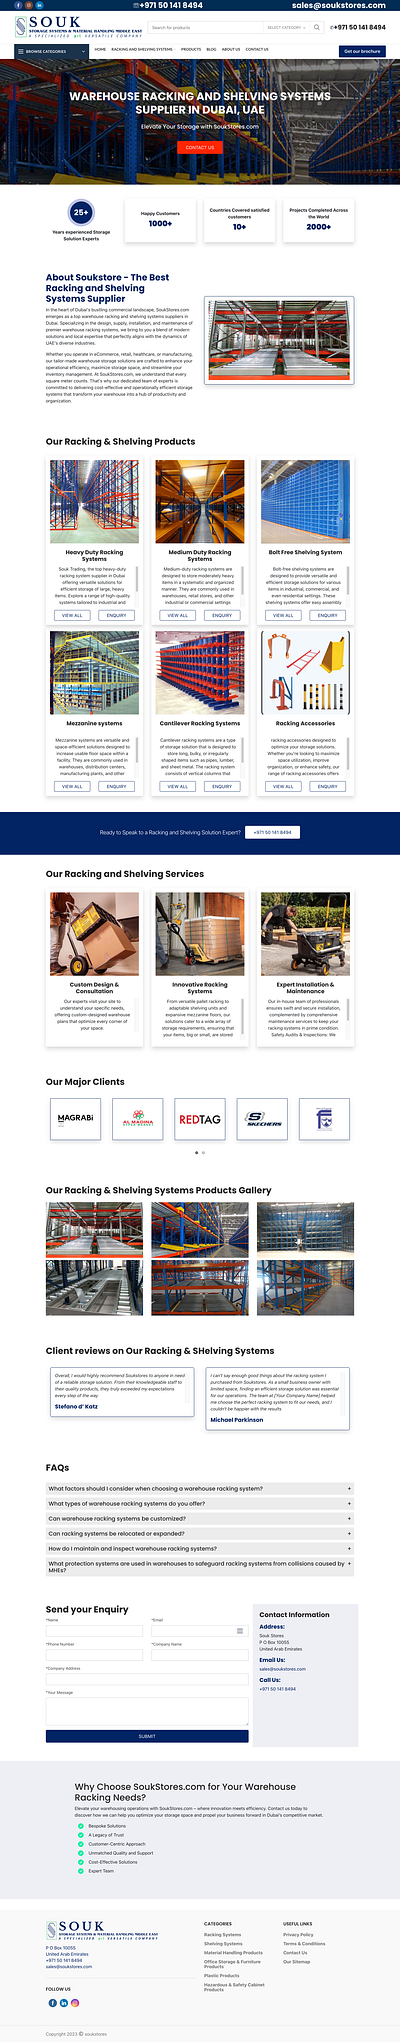 SOUK - Storage Systems and Material Handling Landing Page custom php template design php custom template ui wordpress custom theme